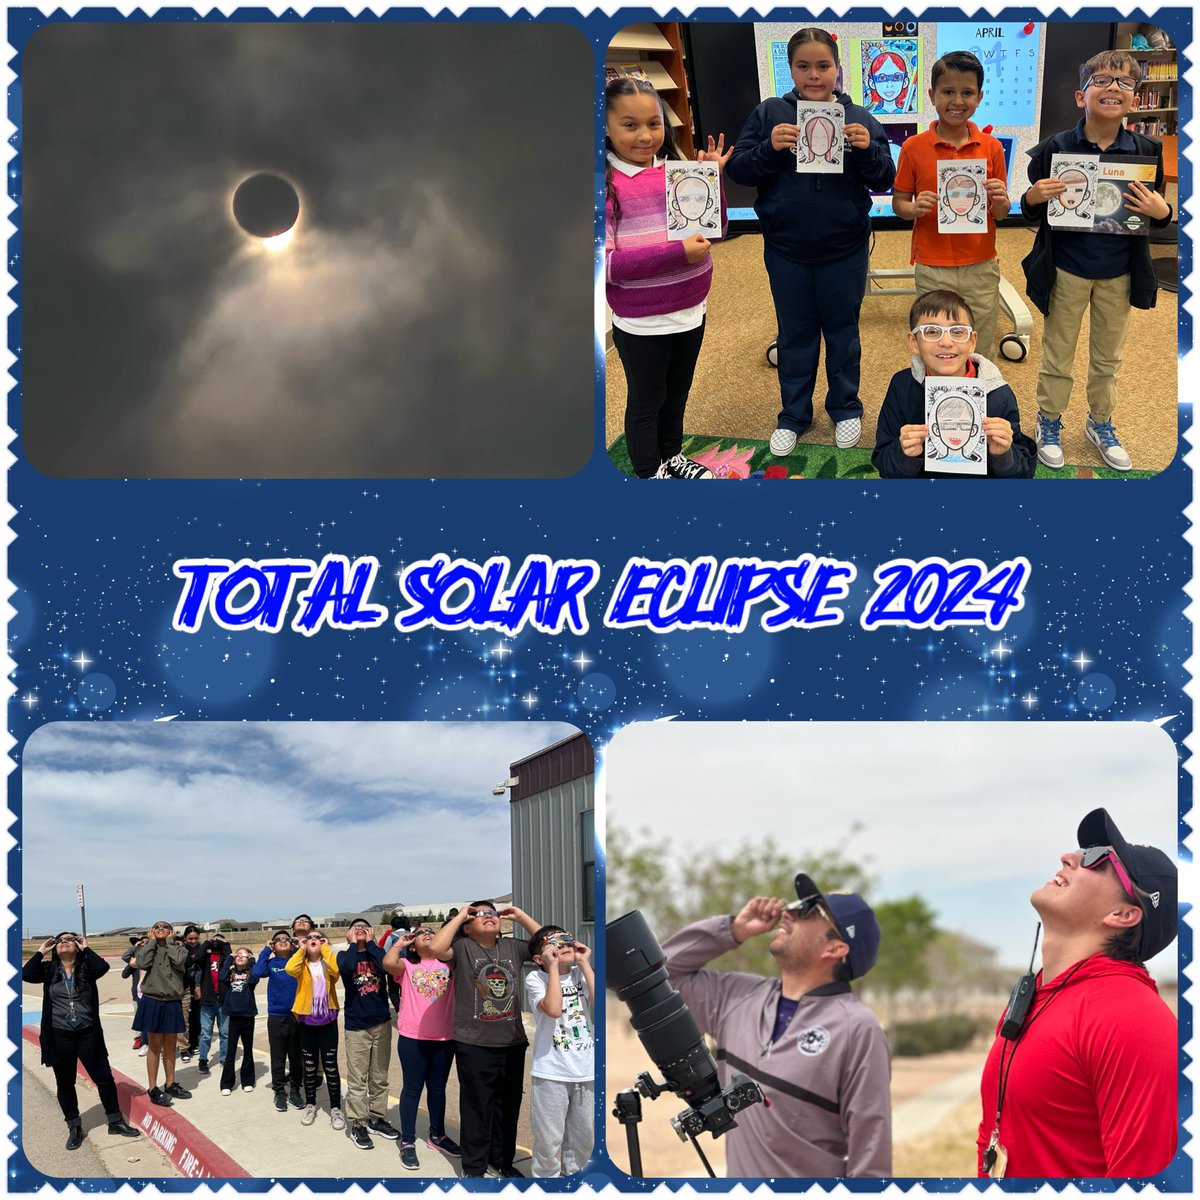 Rattlers experiencing the Total Solar Eclipse! ☀️ 🌖 #TeamSISD #RelentlessRattlers #SolarEclipse2024